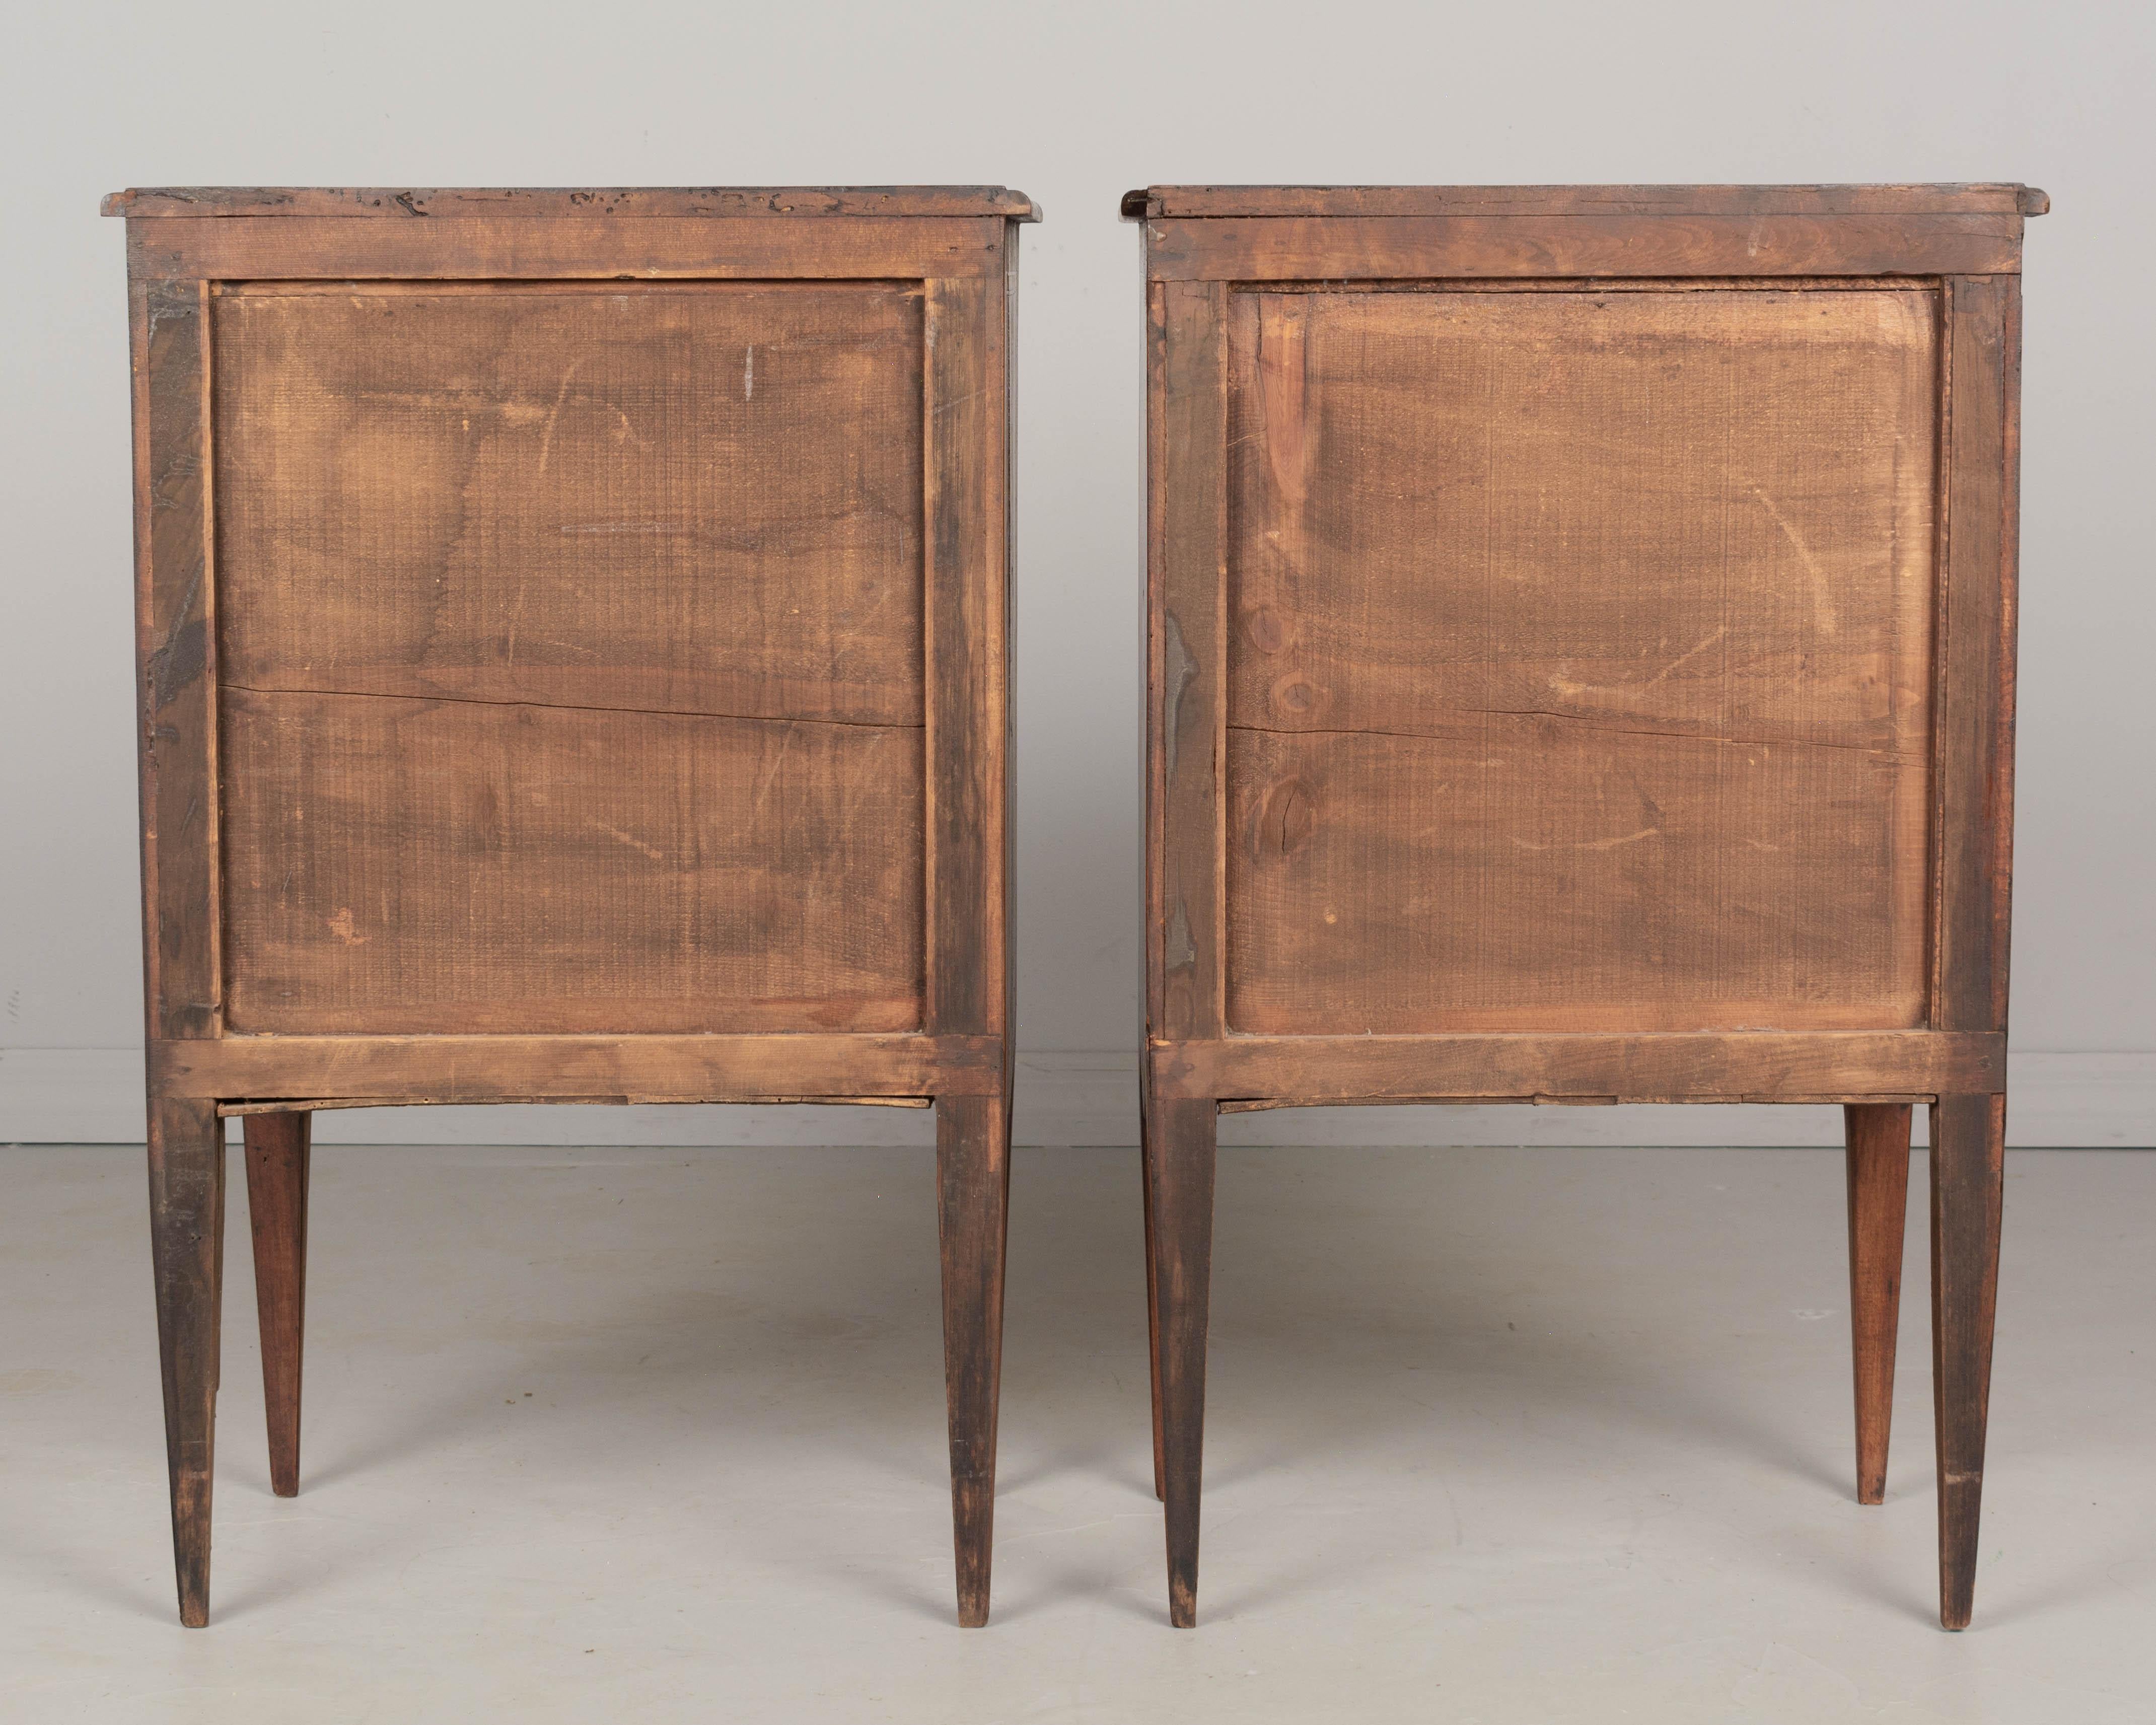 Pair of Italian Marquetry Nightstands or Side Tables In Good Condition For Sale In Winter Park, FL